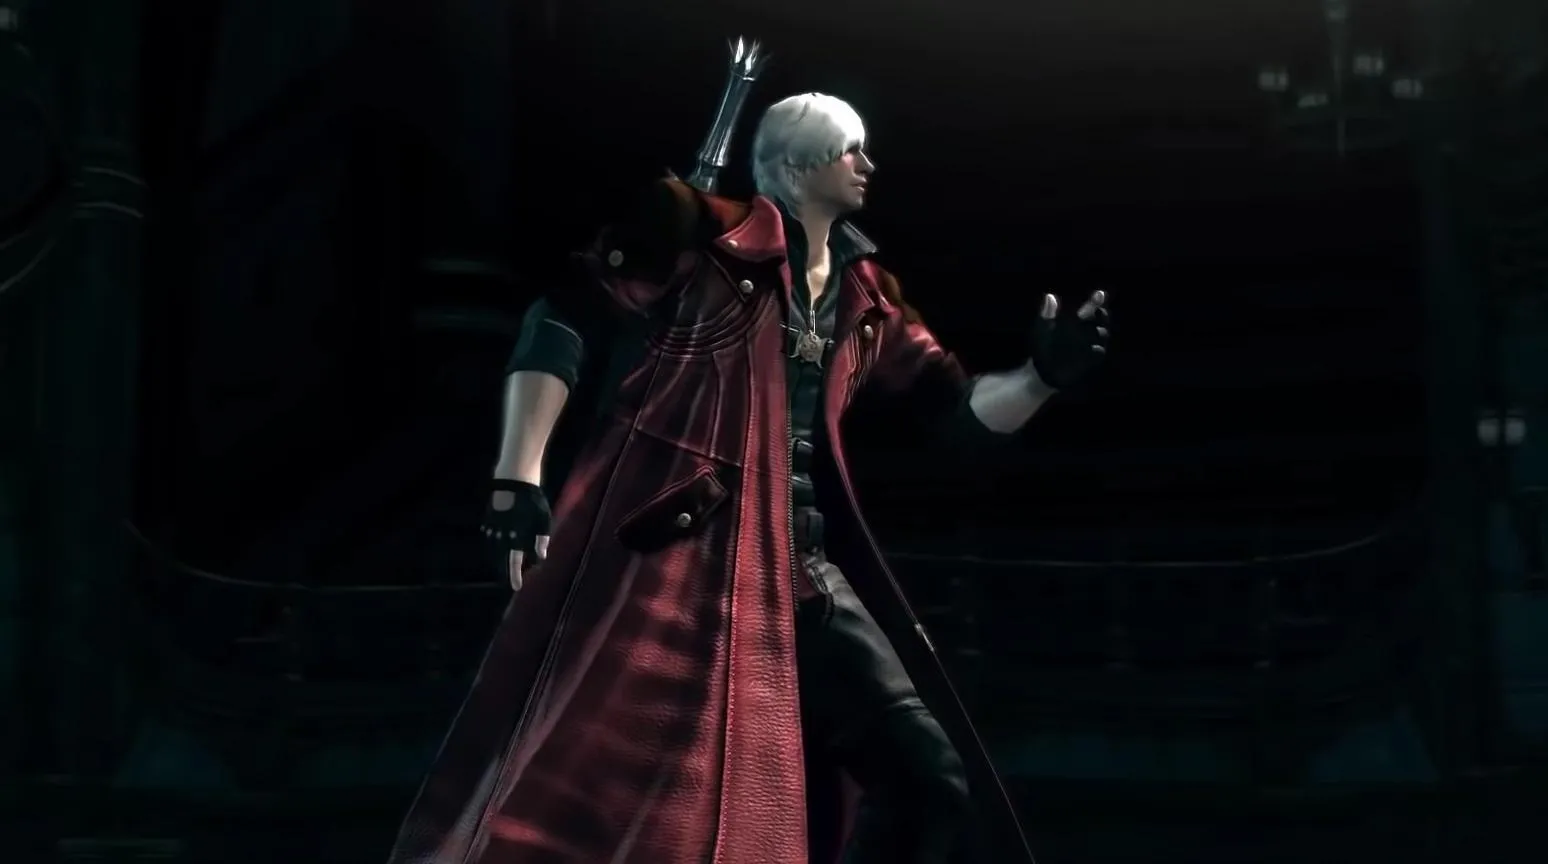 devil may cry 4 drama is sanity the price to pay for power